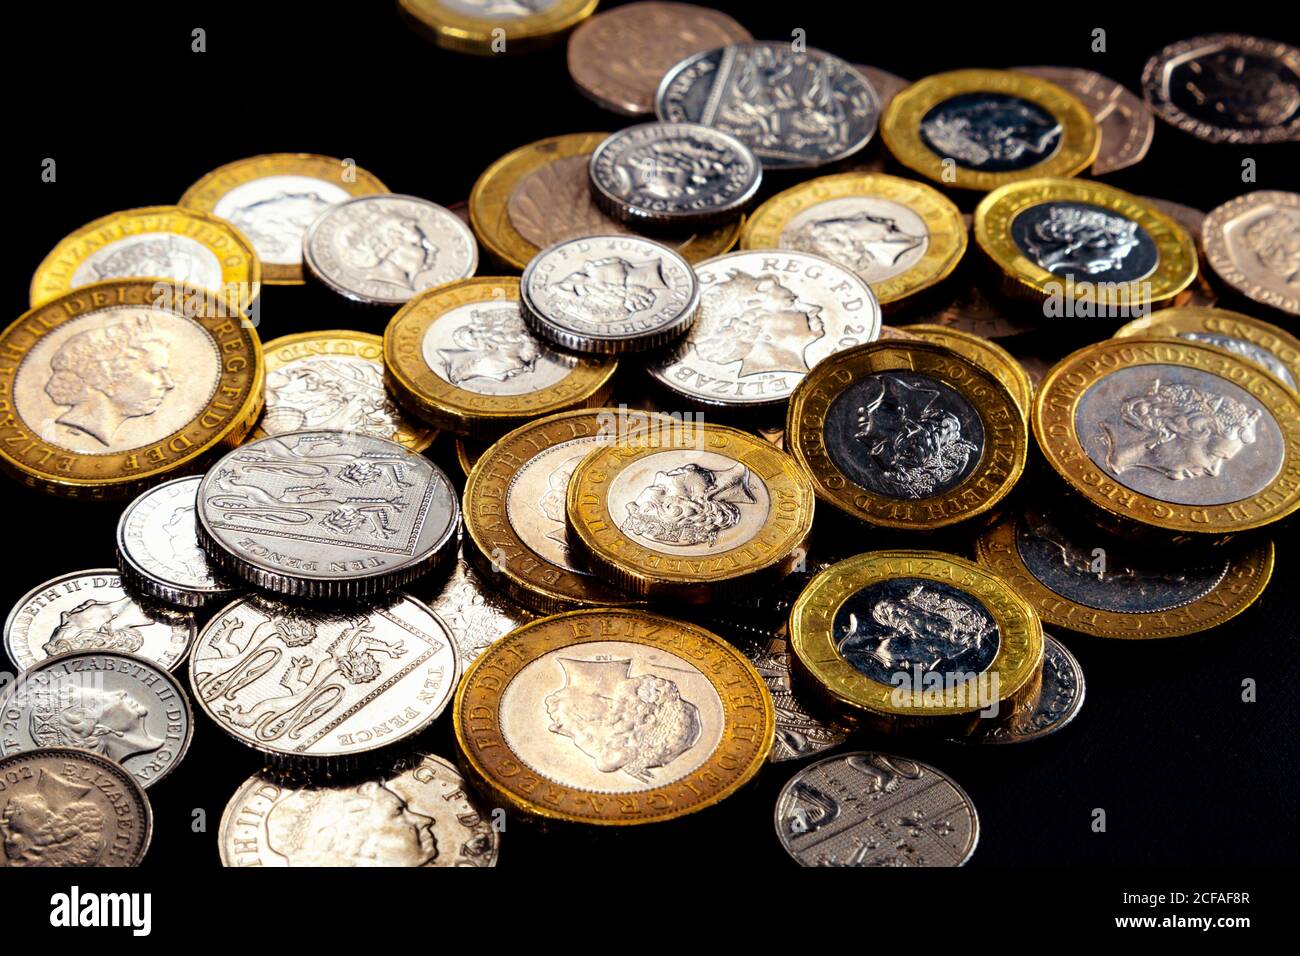 Studio shot of scattered British Pound coins Stock Photo